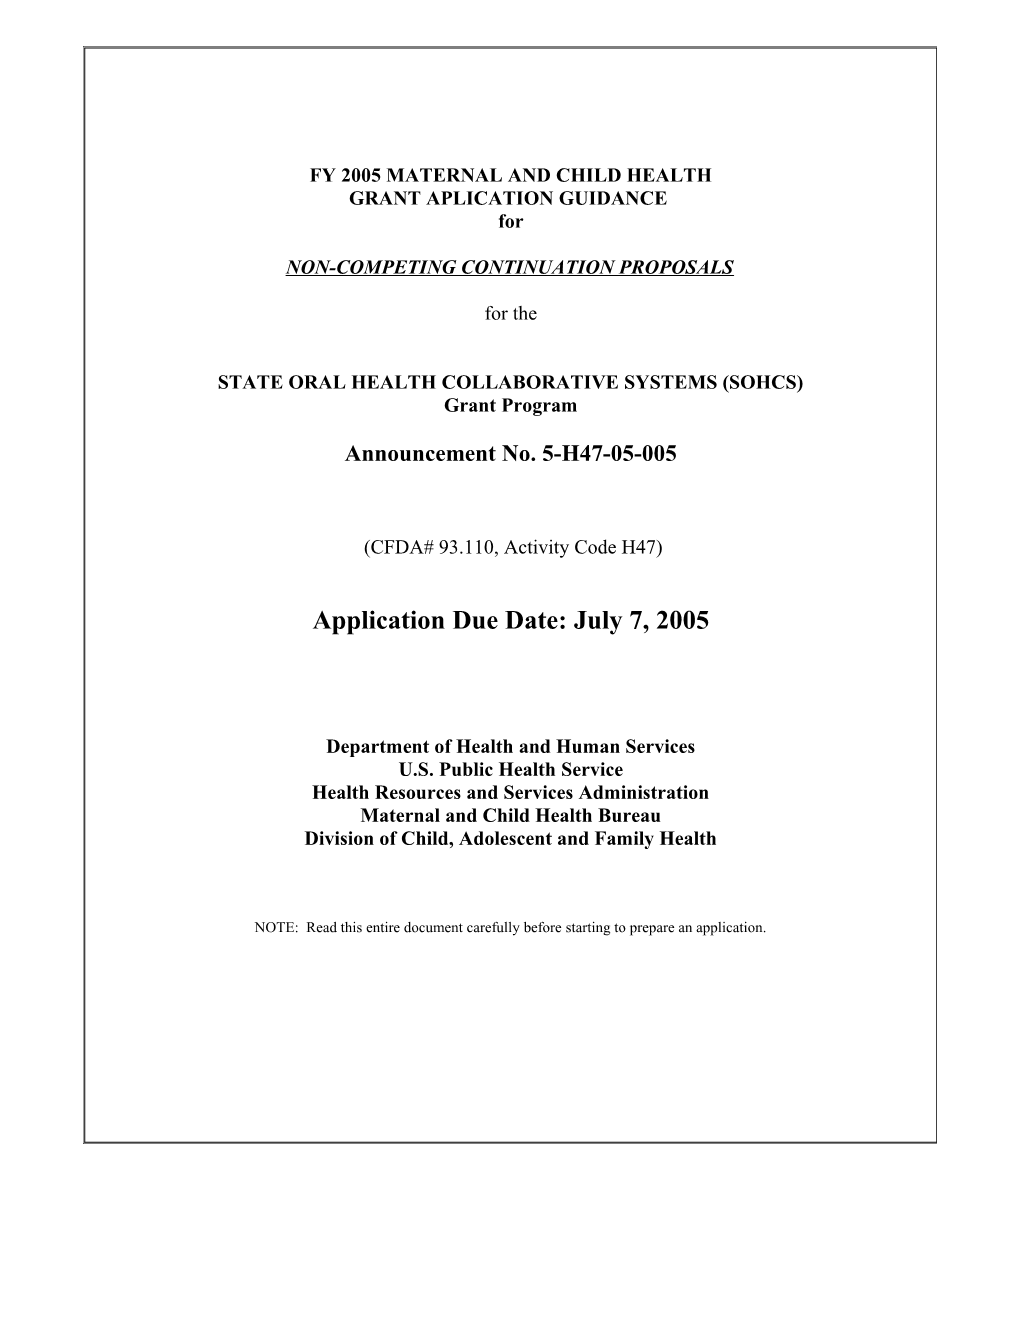 FY 2005 Continuation Guidance, State Oral Health Collaborative Systems (SOHCS) Program Page 1